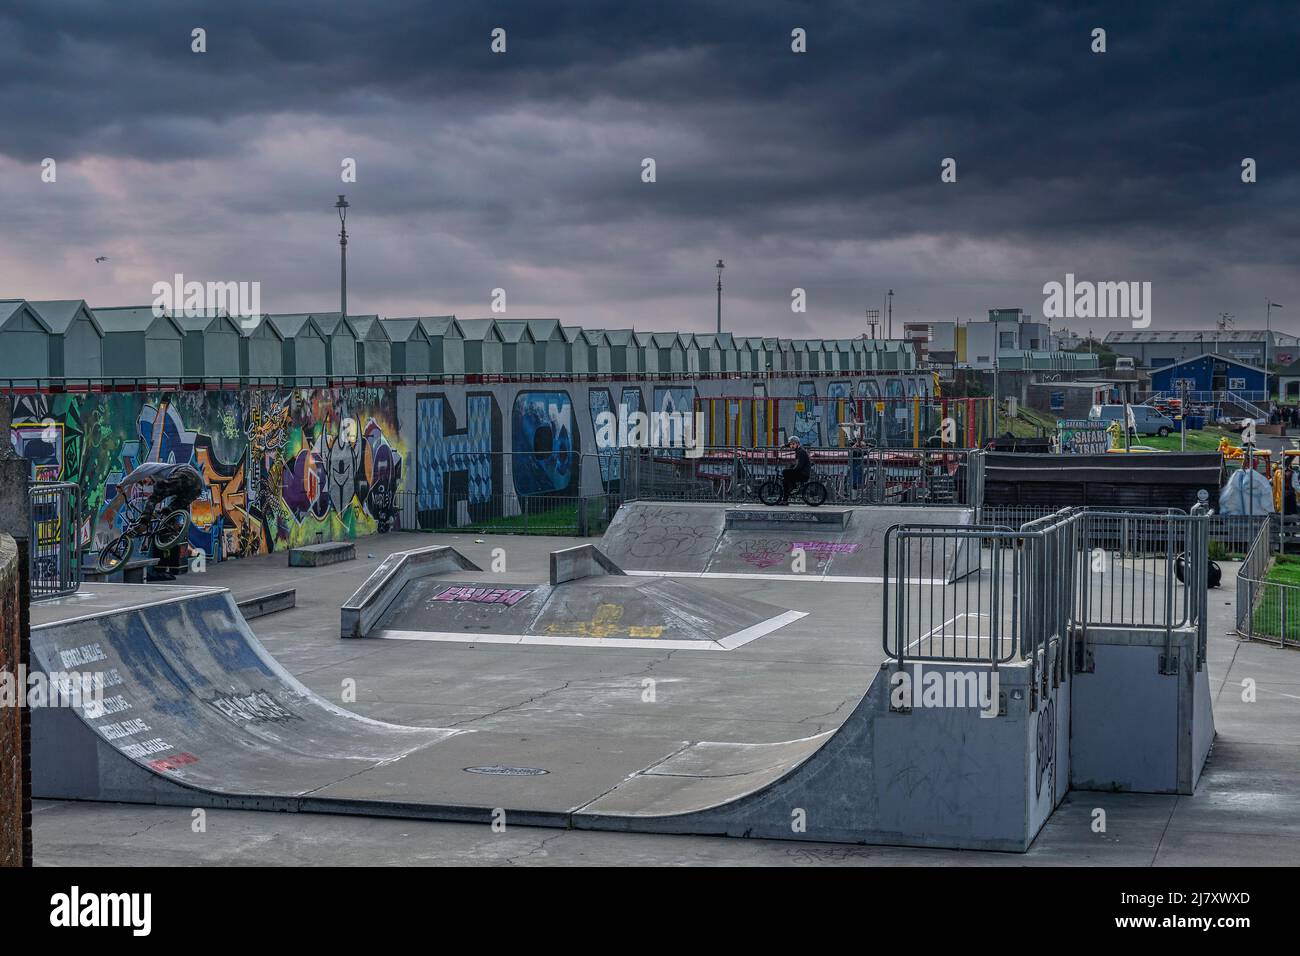 The skate park at The Big Beach Cafe owned by fat Boy Slim (Norman Cook) at Hove Lagoon on Hove seafront with the beach huts and street art Stock Photo